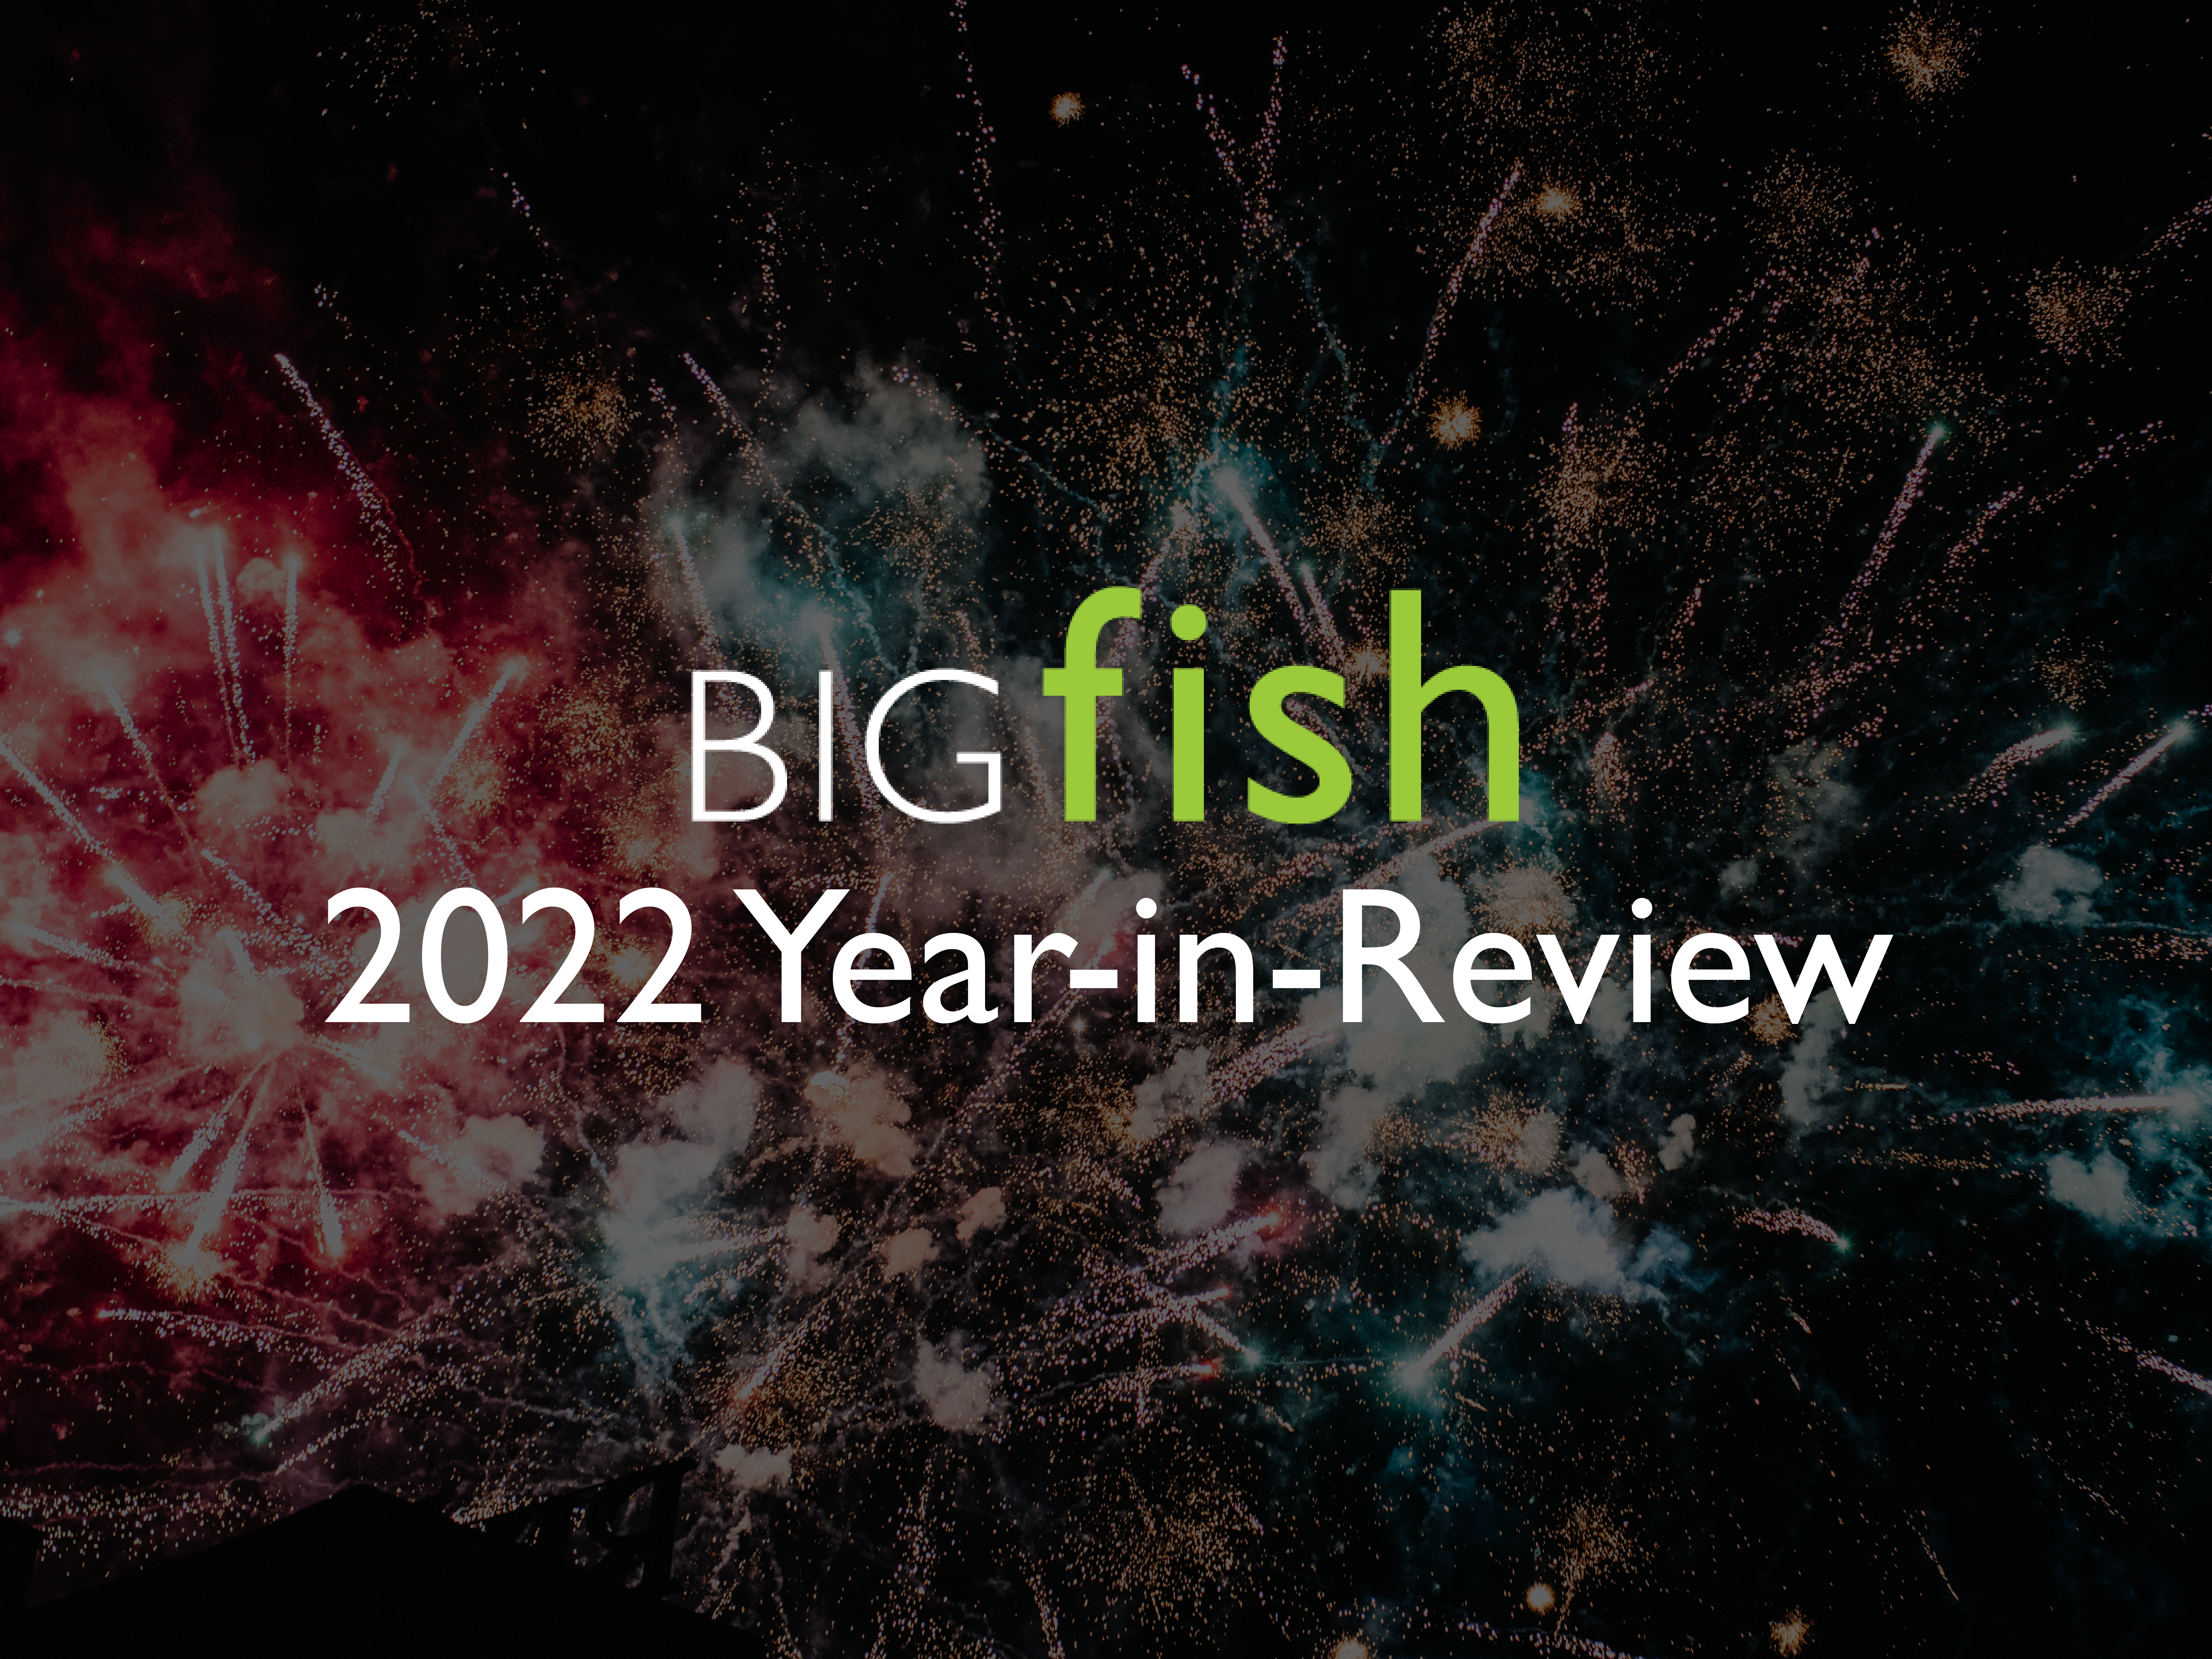 From CNN to Good Morning America: BIGfish PR’s 2022 Strategy Reaches Potential Audience of Over 4 Billion